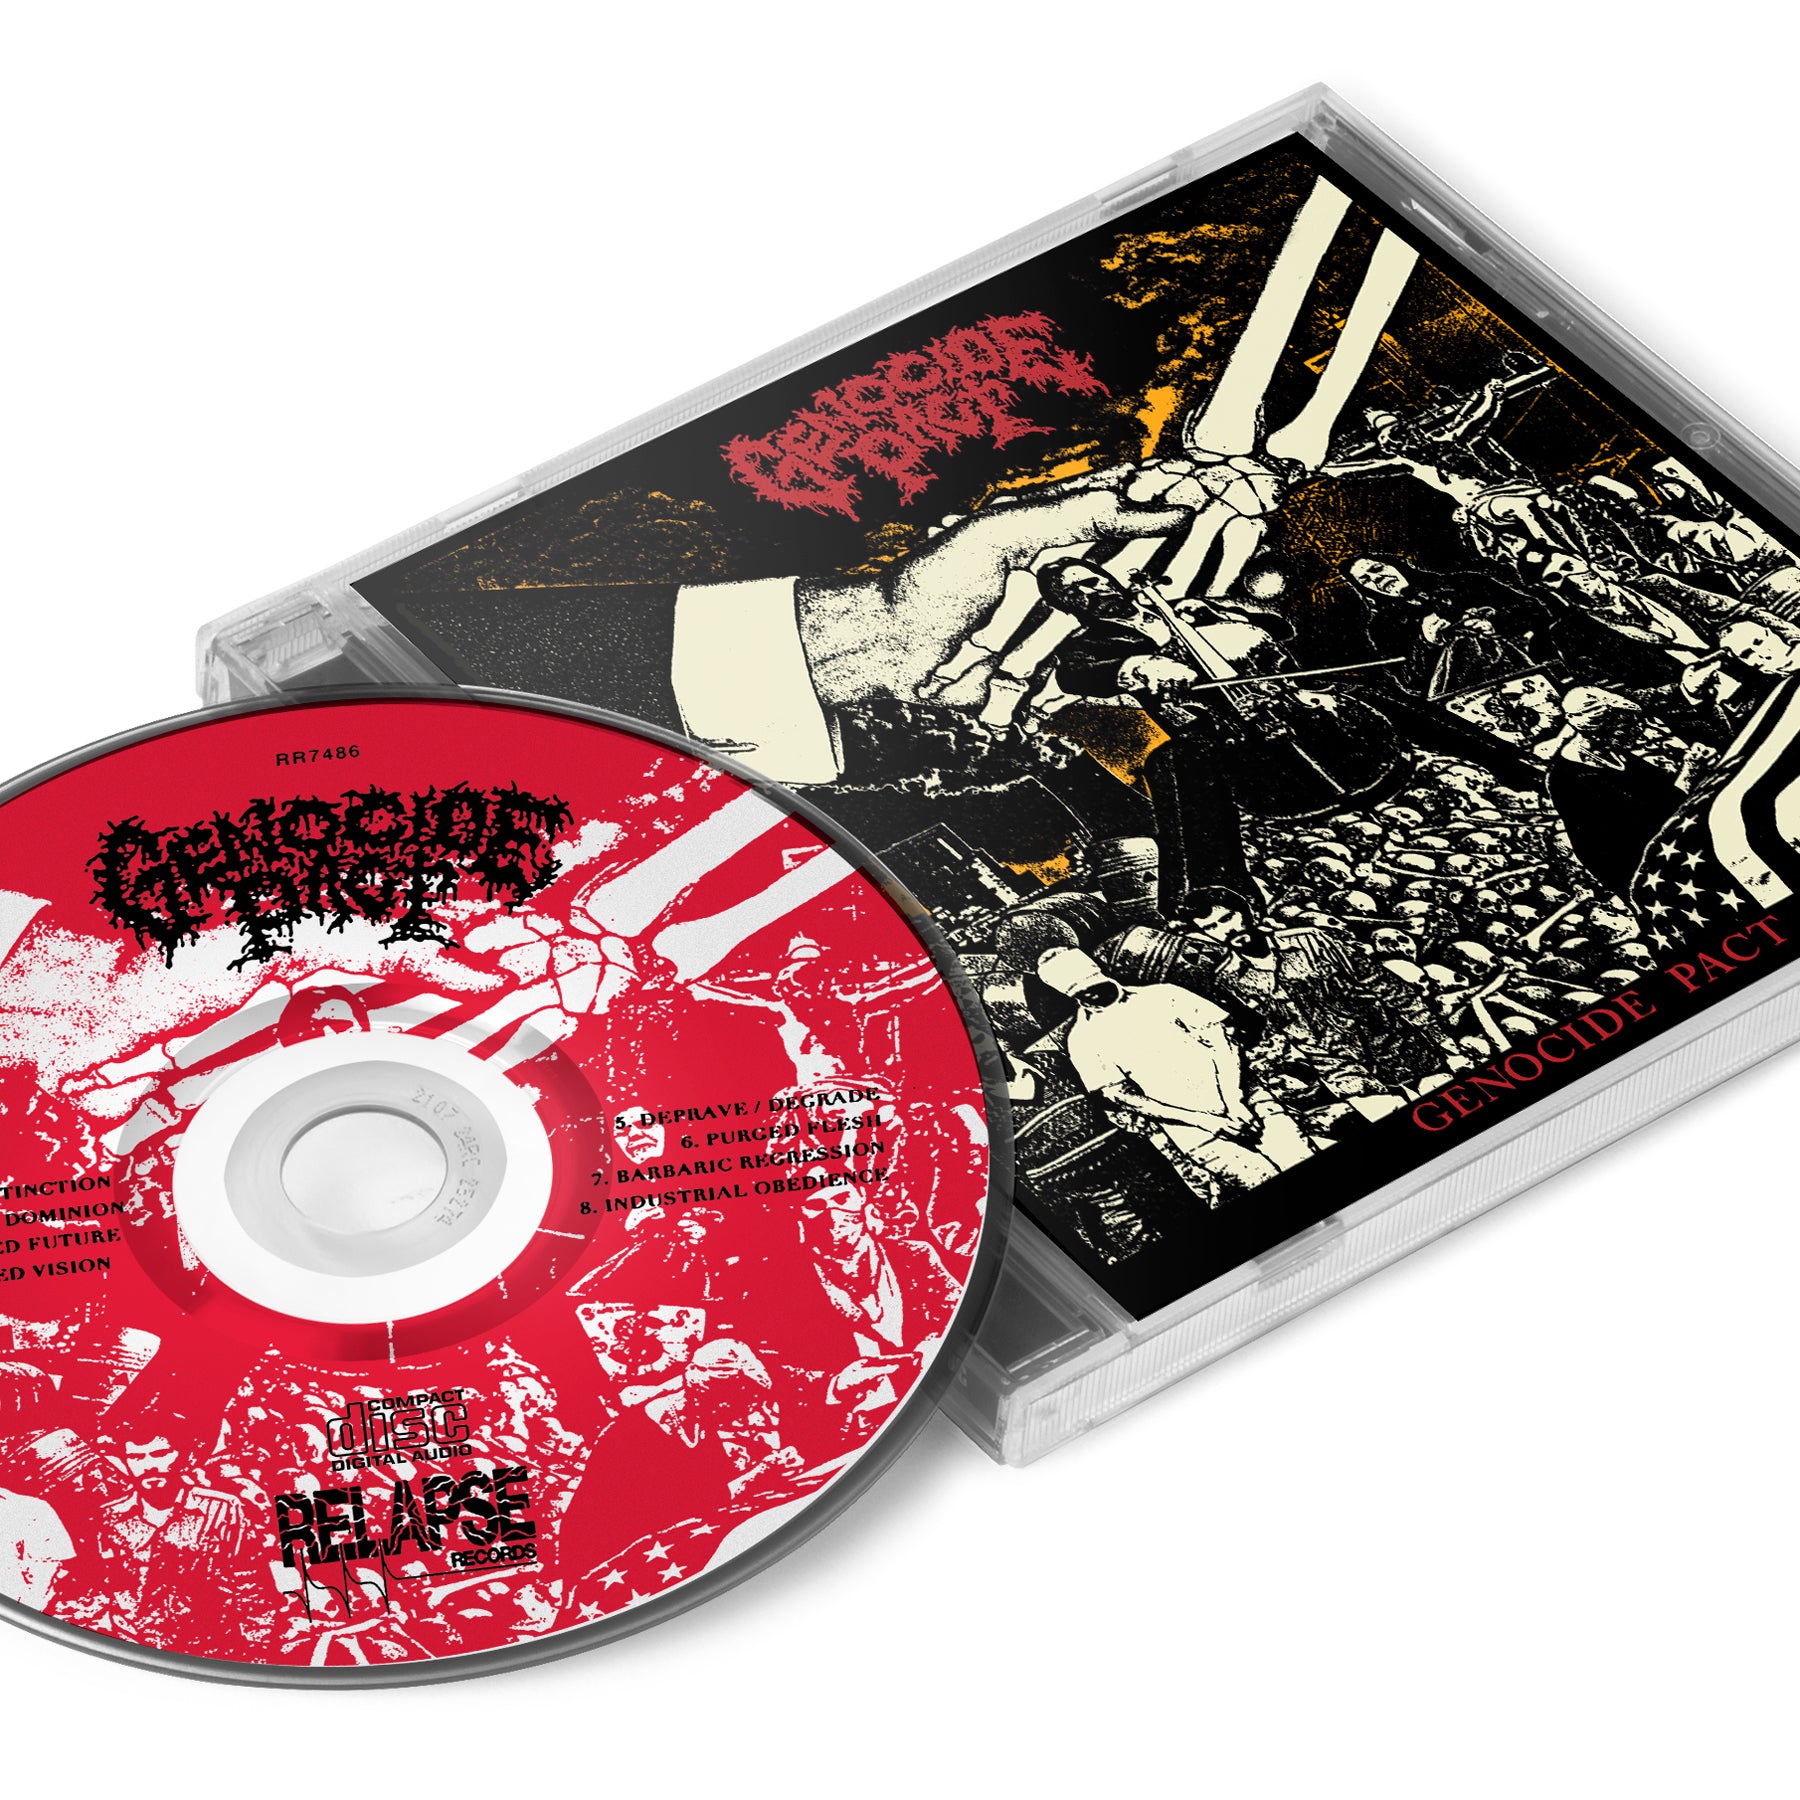 Genocide Pact "Genocide Pact" CD